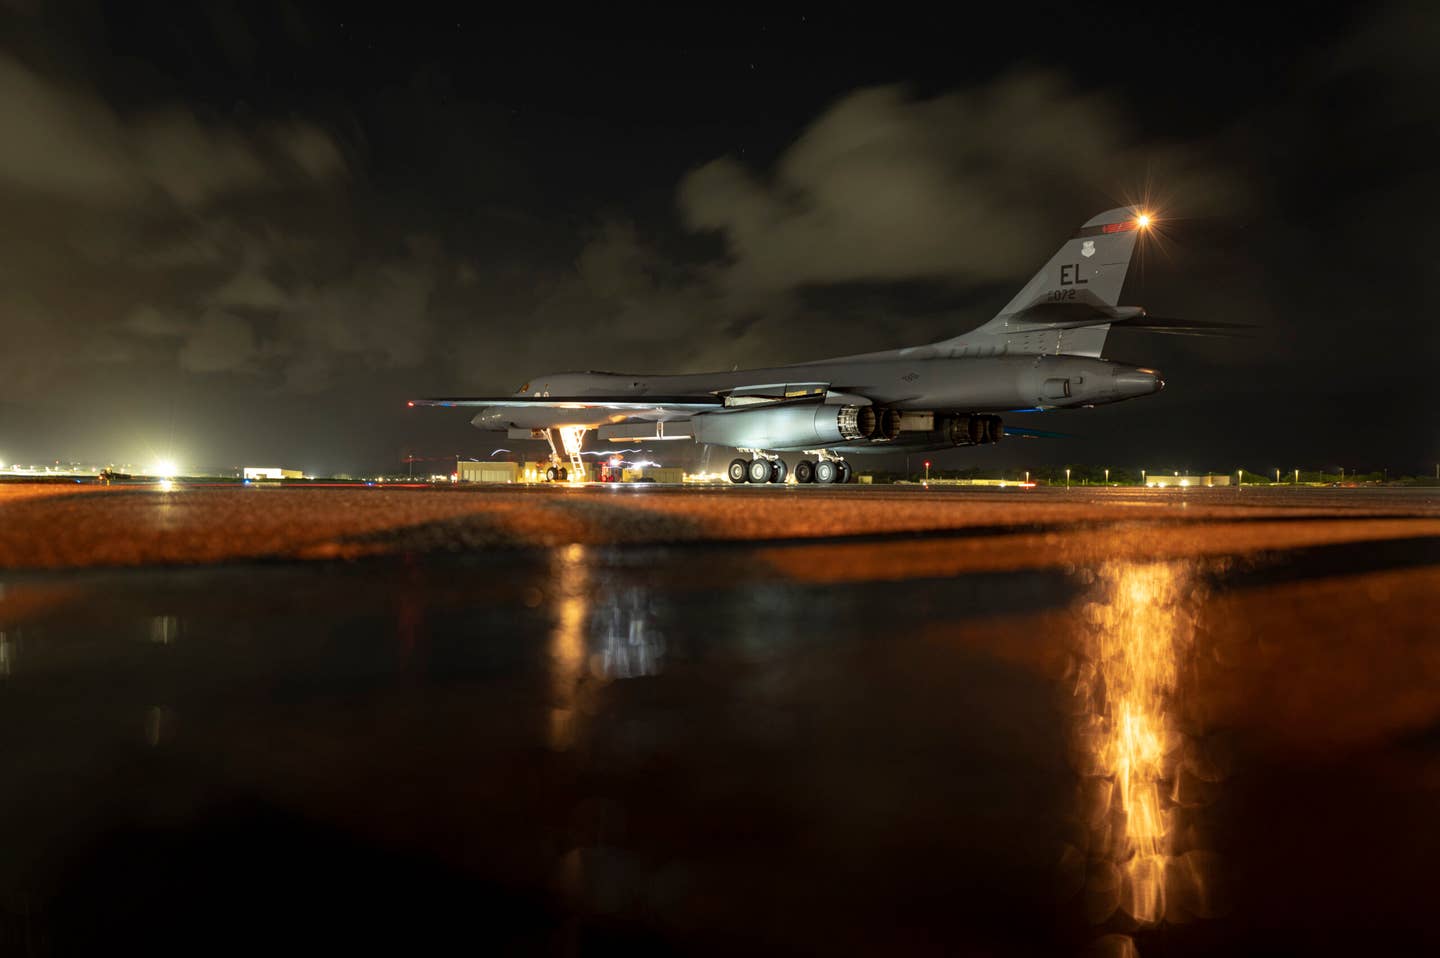 U.S. Air Force service members, assigned to the 34th Aircraft Maintenance Unit, inspect a B-1B at Andersen, after a Bomber Task Force mission, June 25, 2022. <em>U.S. Air Force photo by Master Sgt. Nicholas Priest</em>